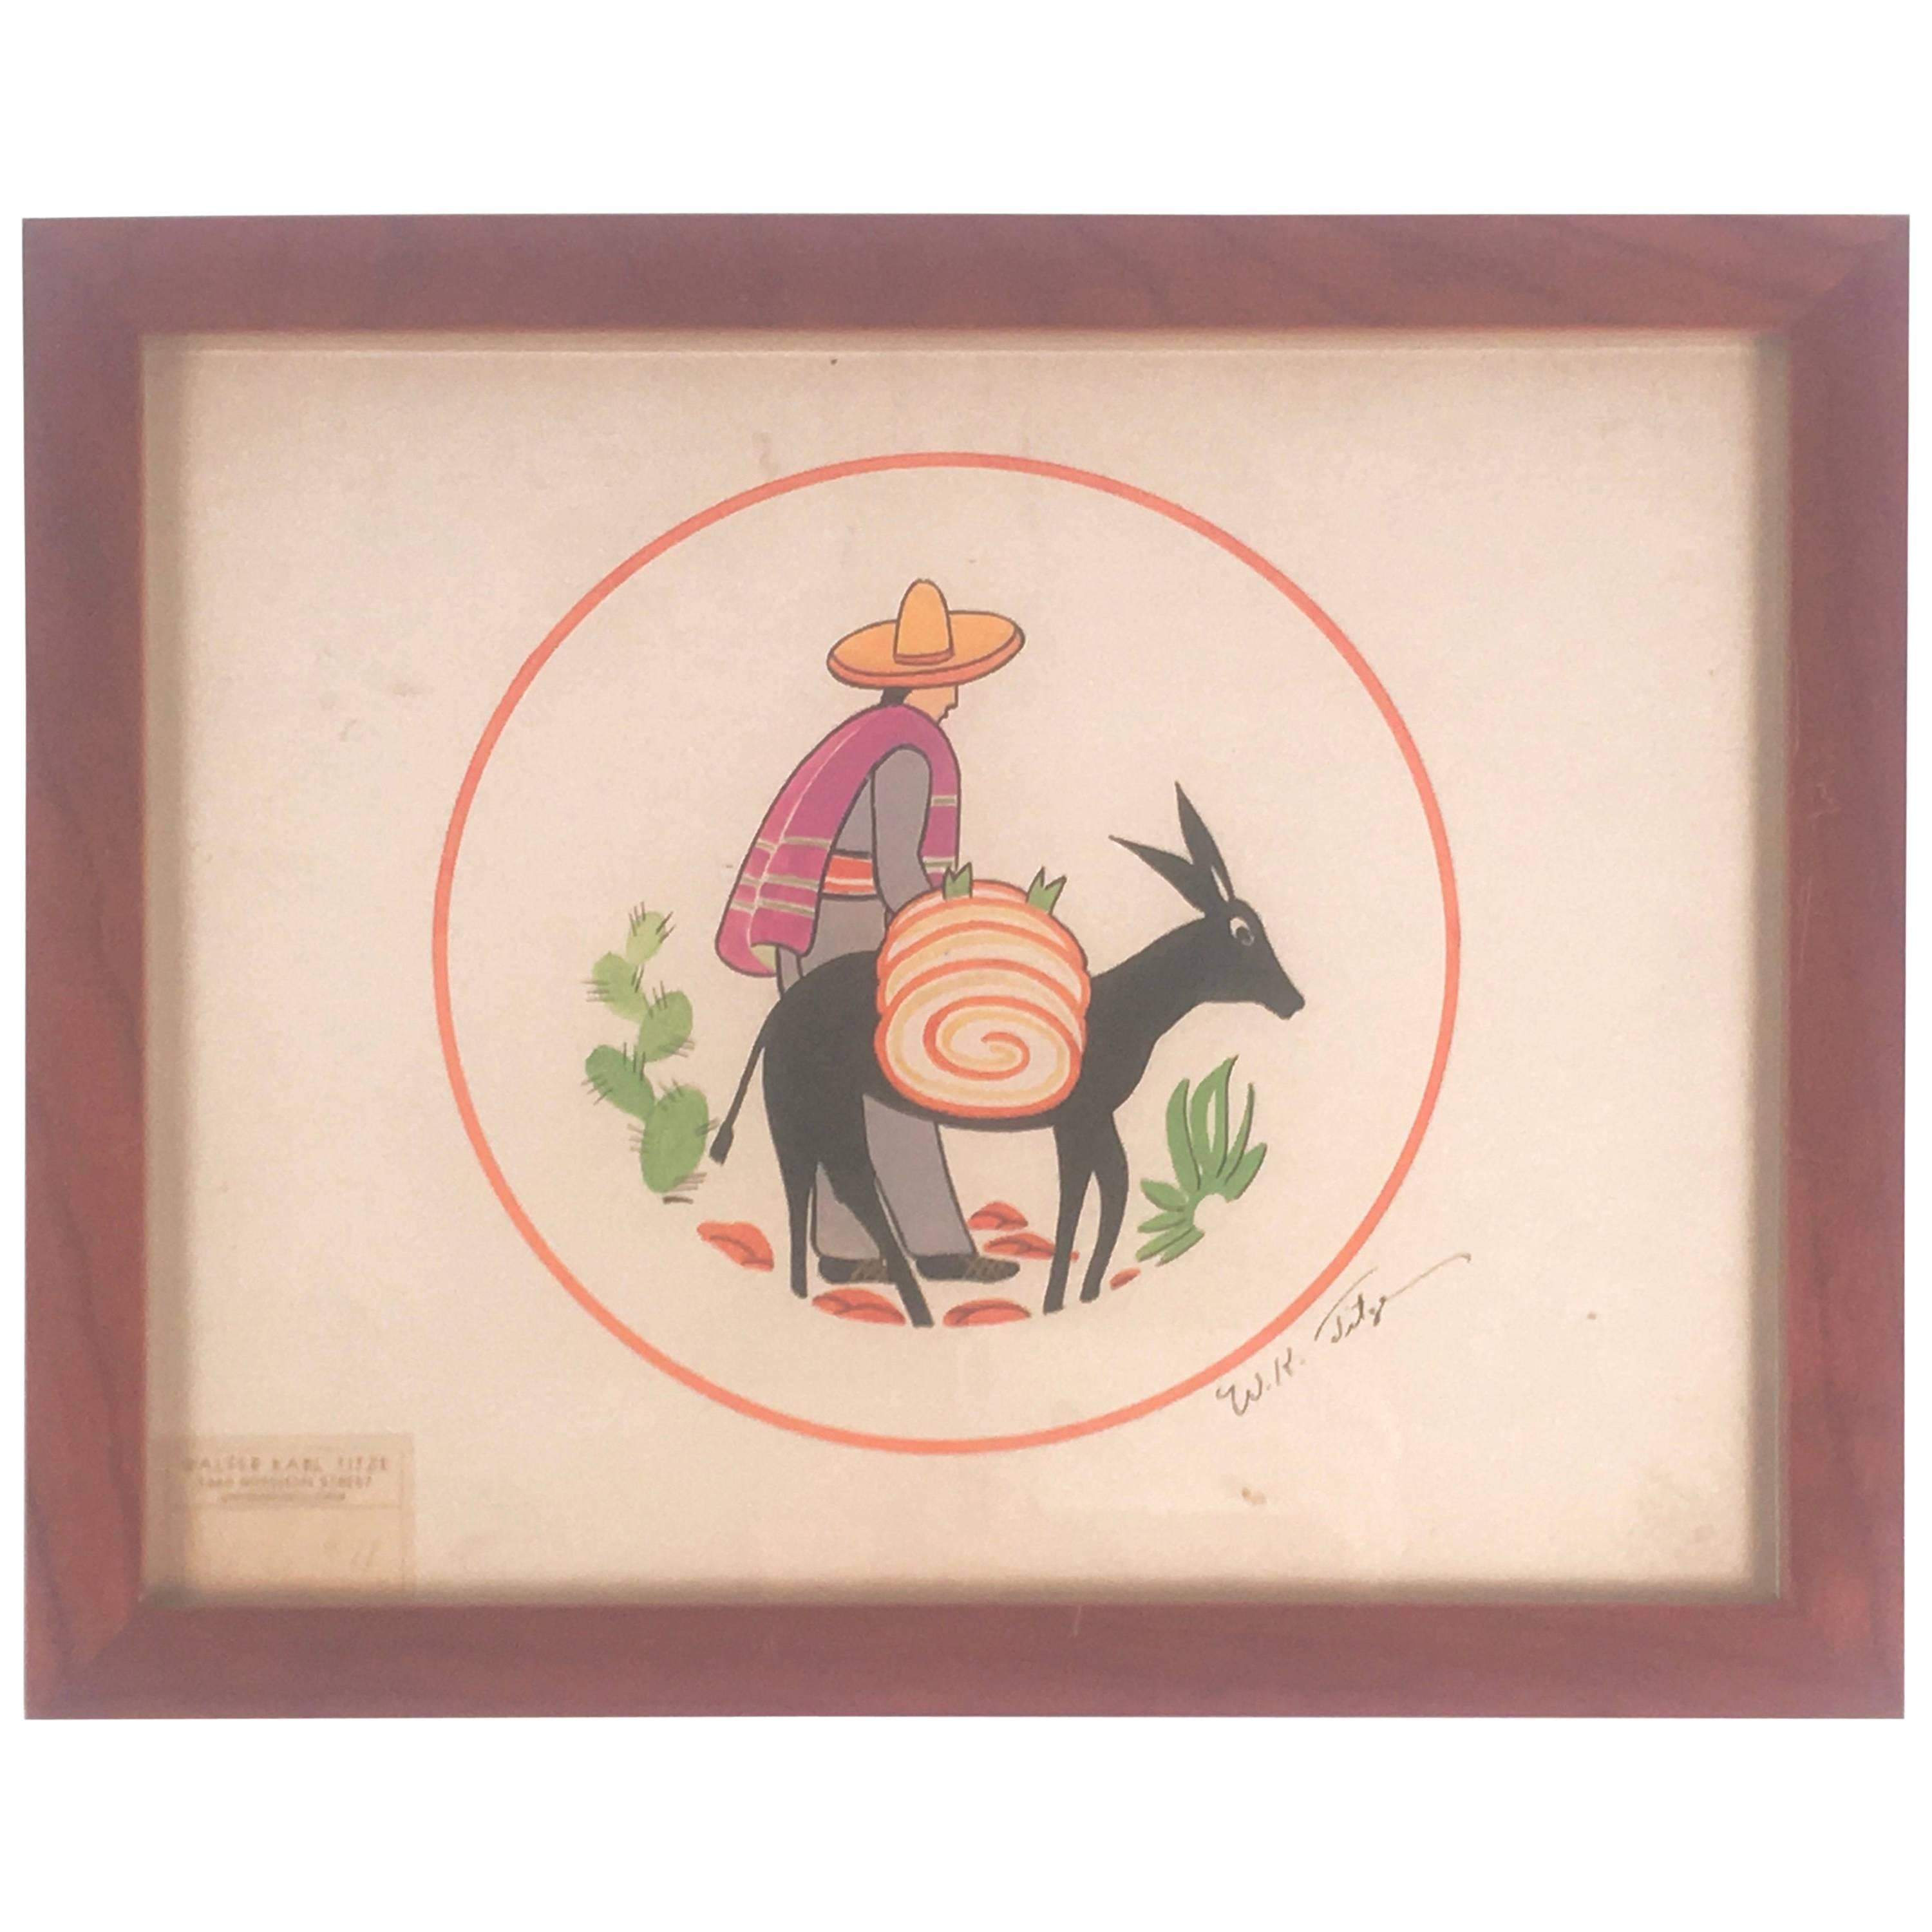 Art Deco Walter Karl Titze MexicanThemed Drawing for a Dinner Plate